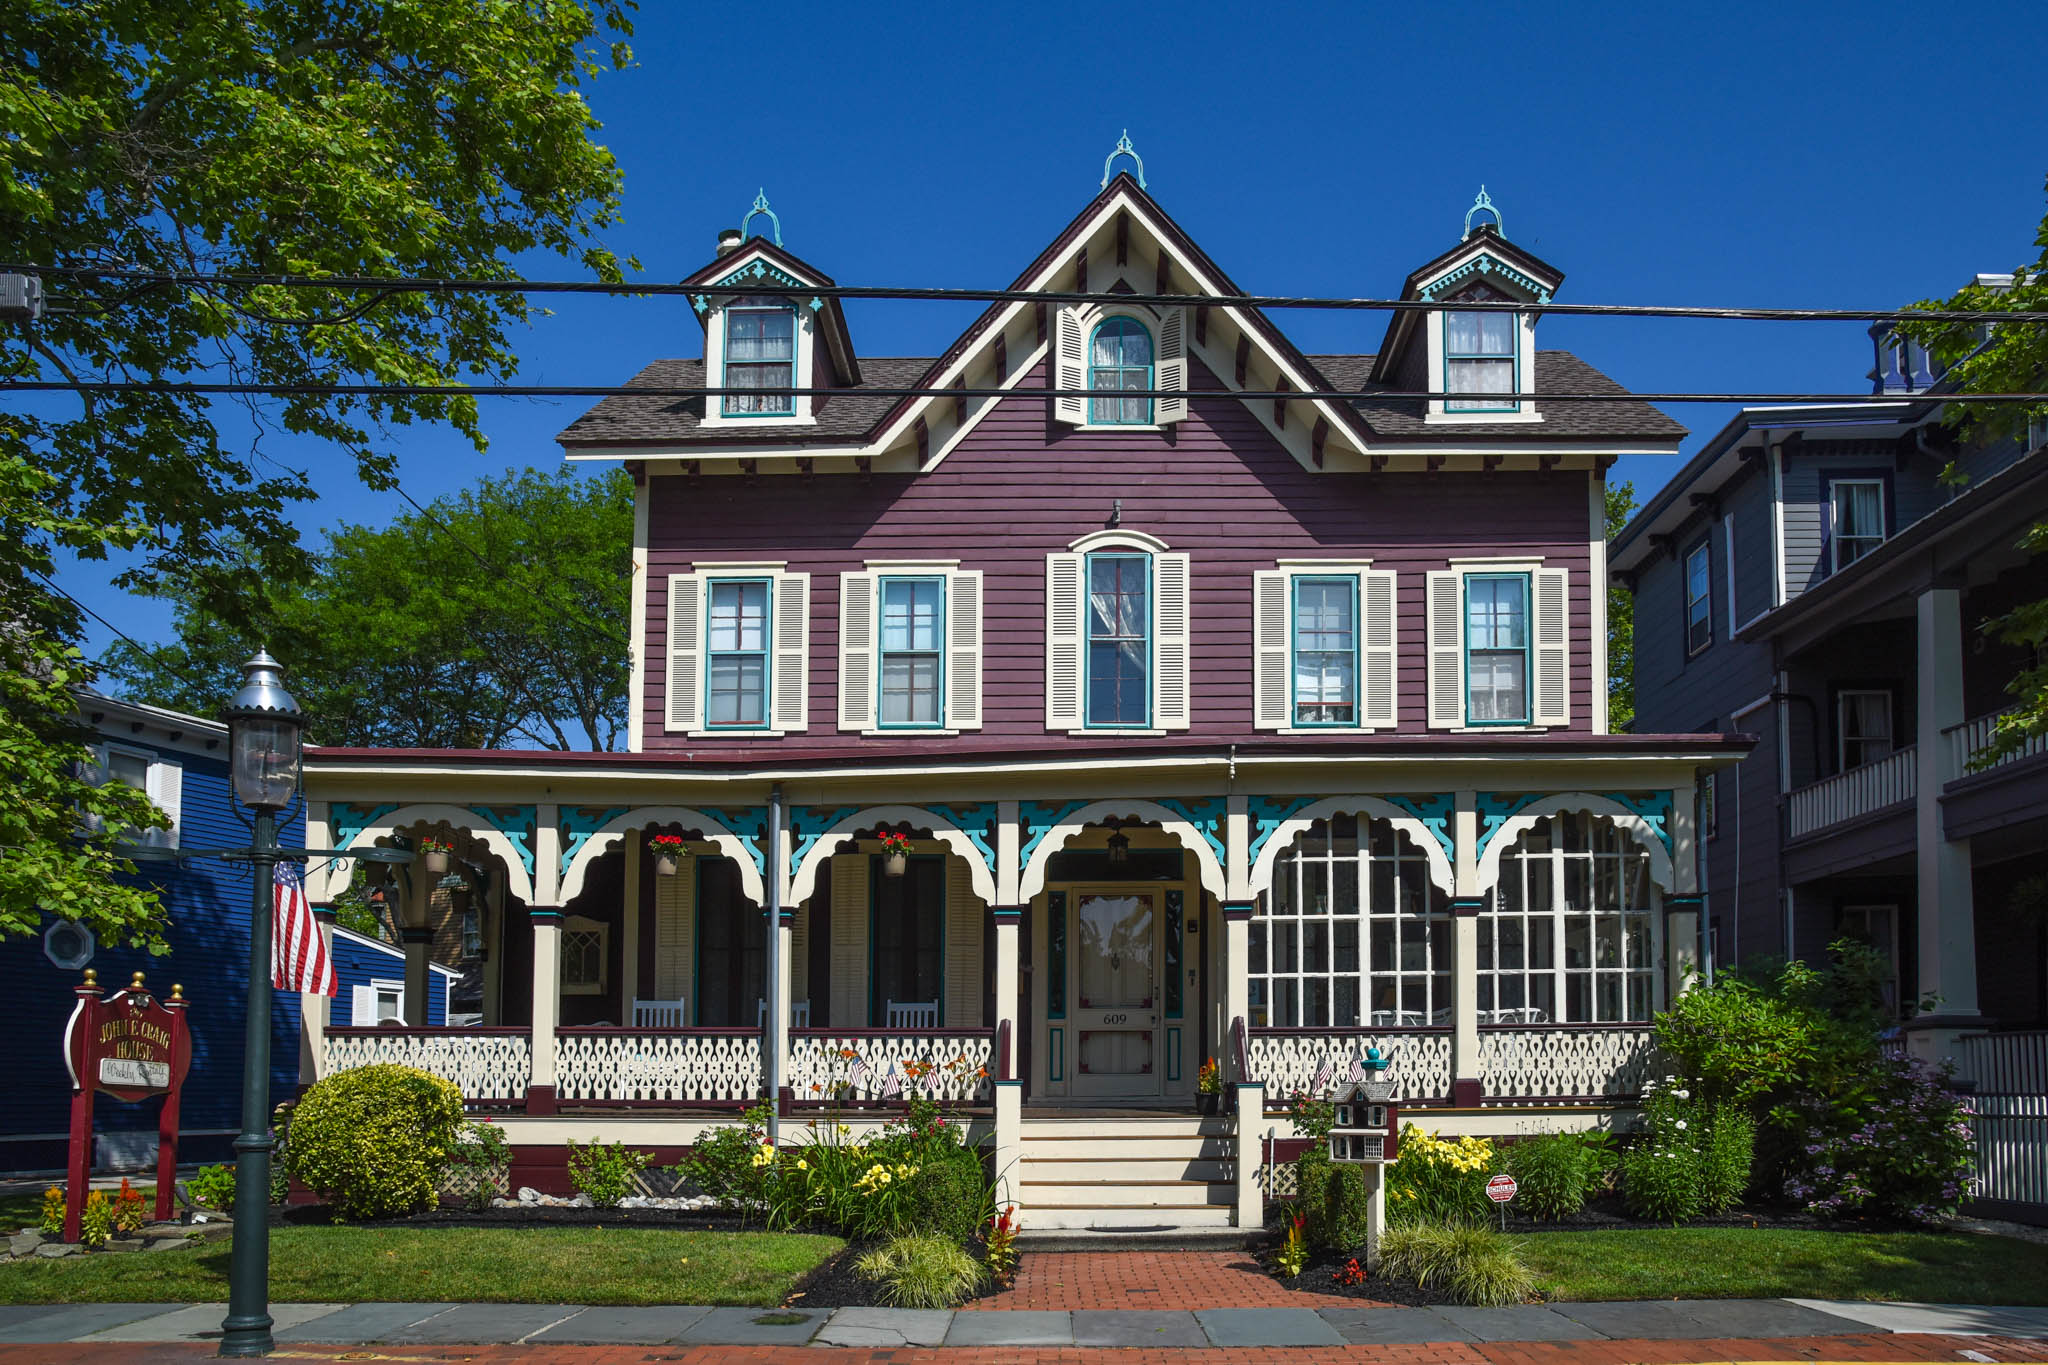 The John F. Craig House located at 609 Columbia Ave, Cape May